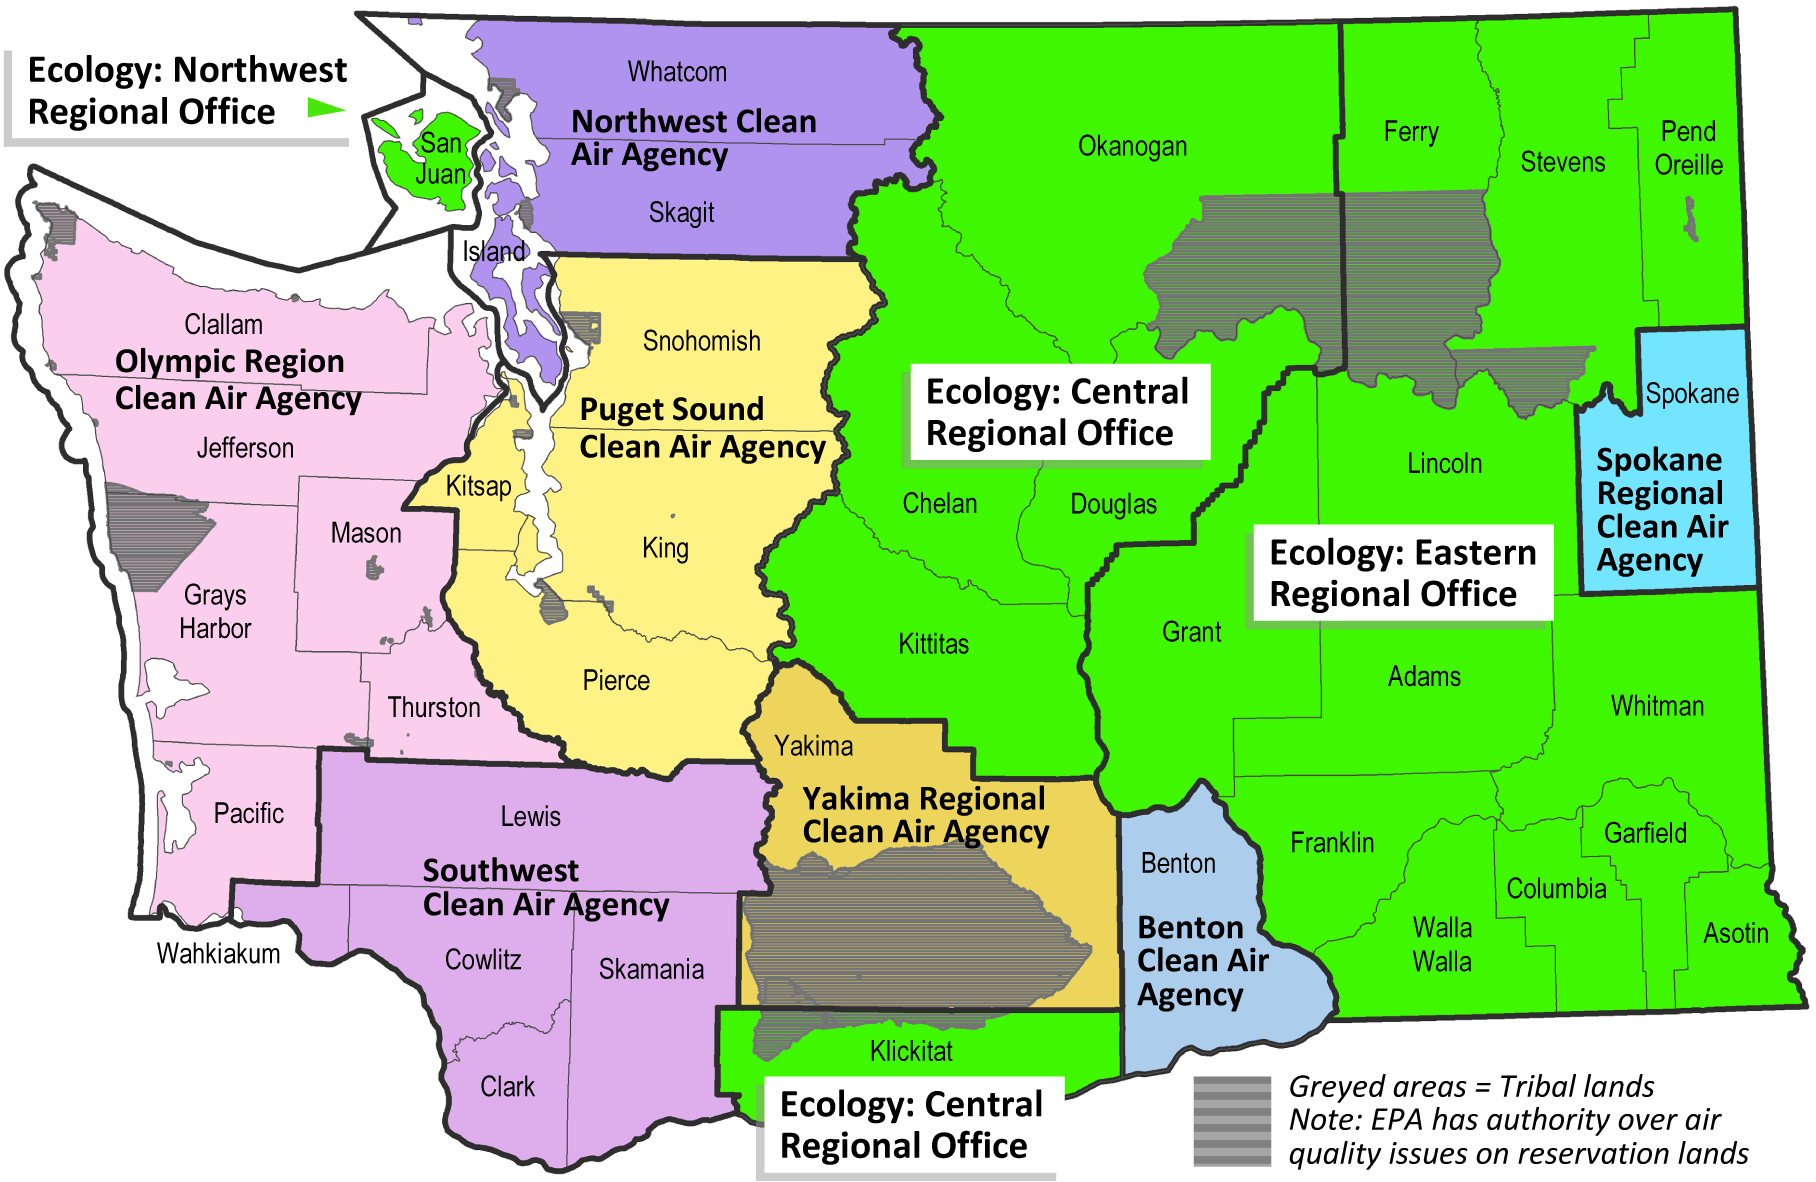 Map of Washington State depicting Clean Air Agencies and Department of Ecology regions.